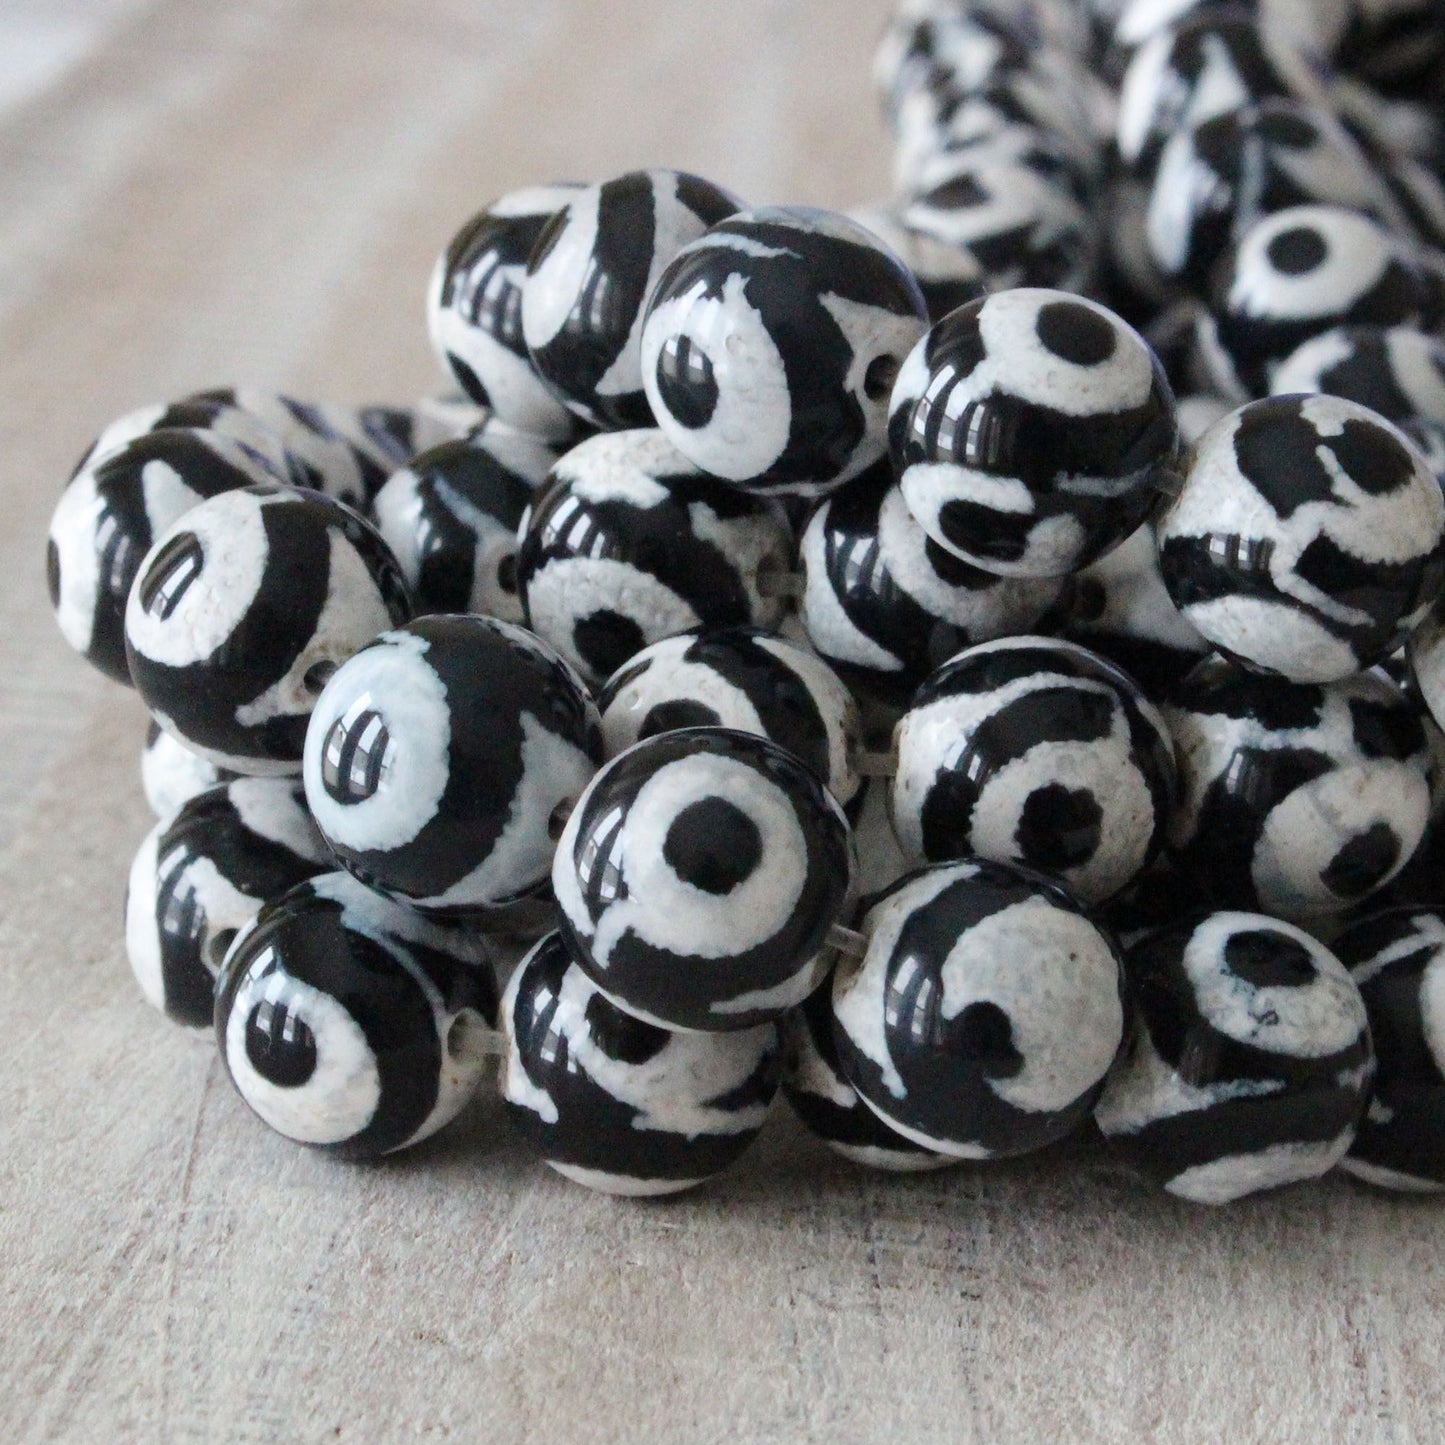 10mm Black and White Agate Beads - 16 Inches